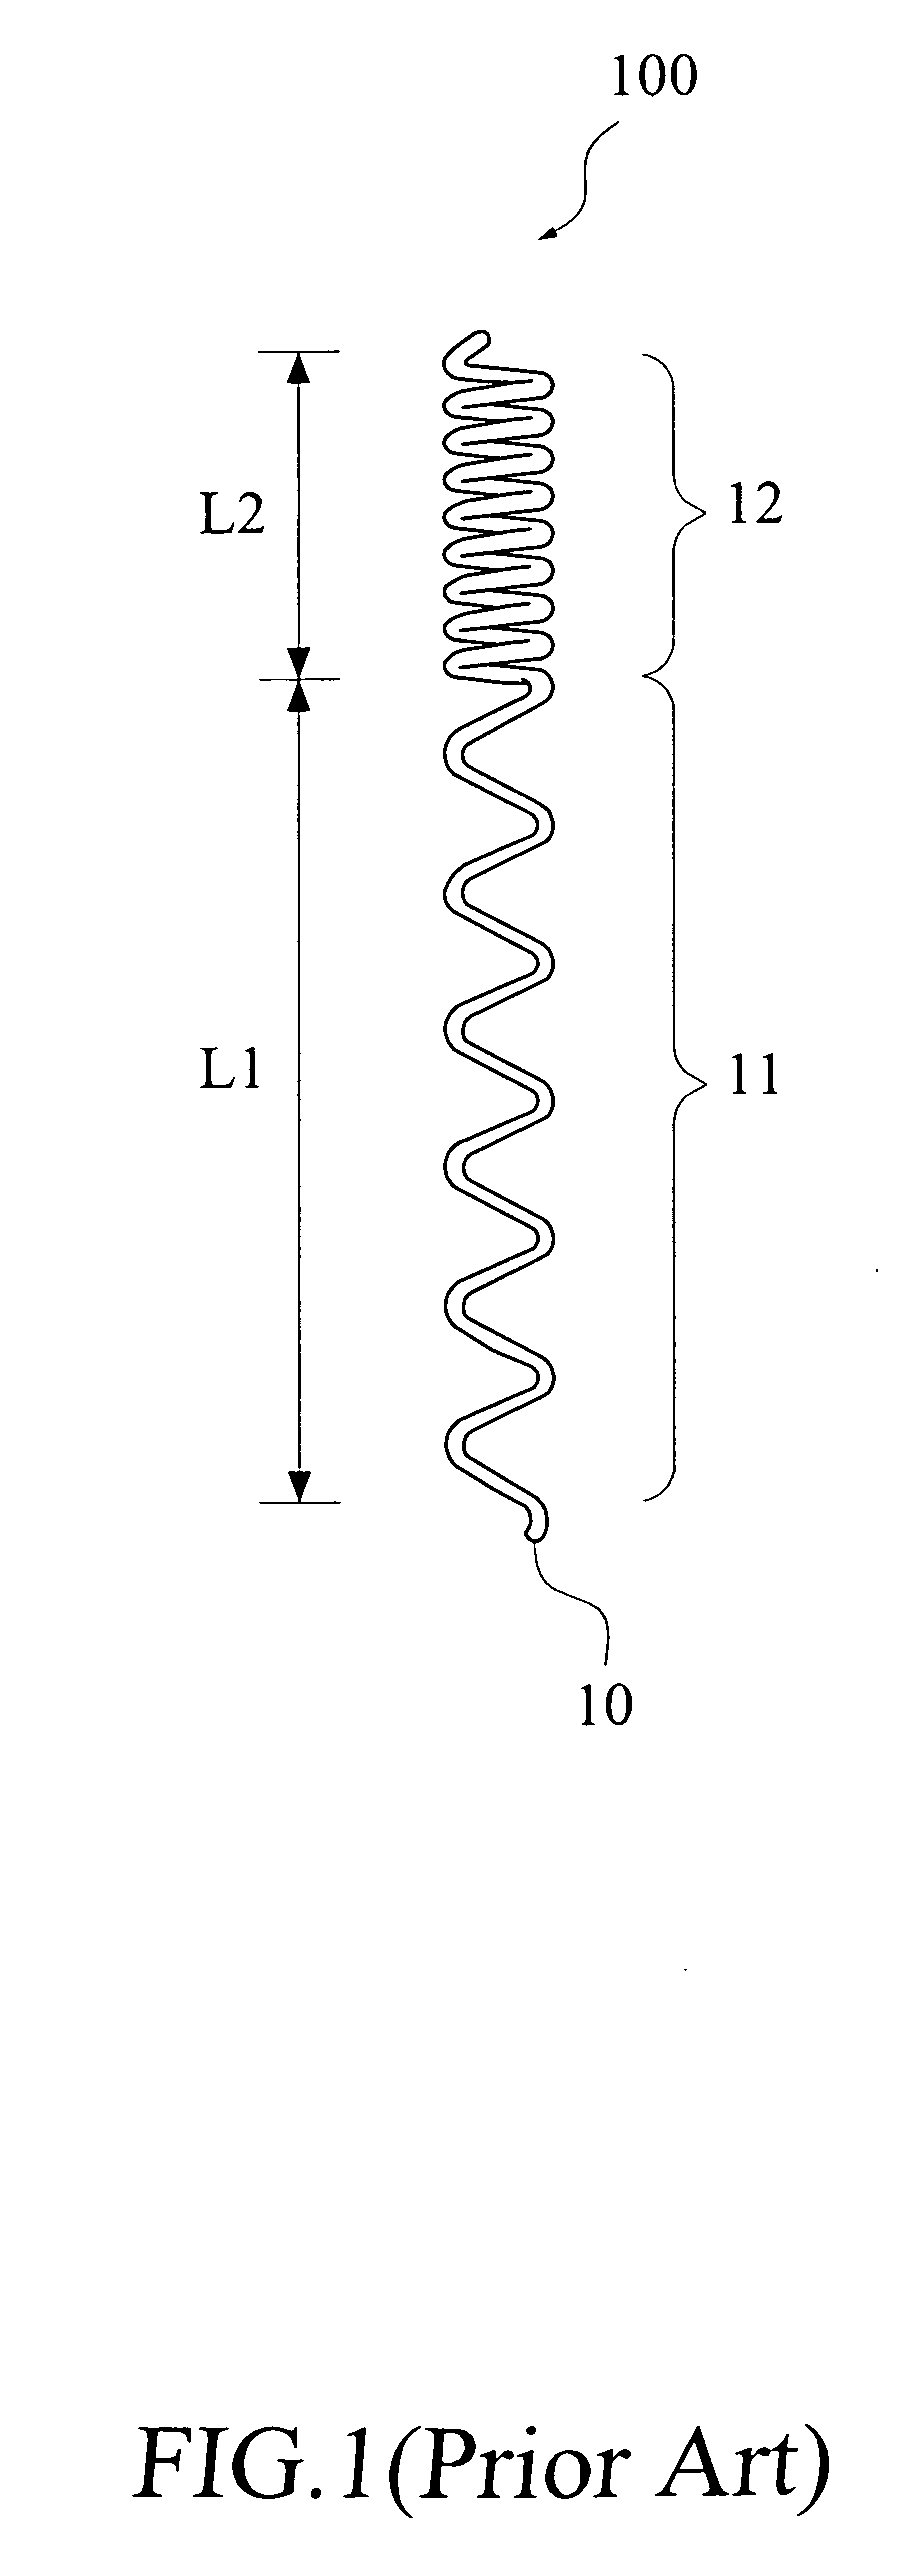 Dual band helical antenna with wide bandwidth